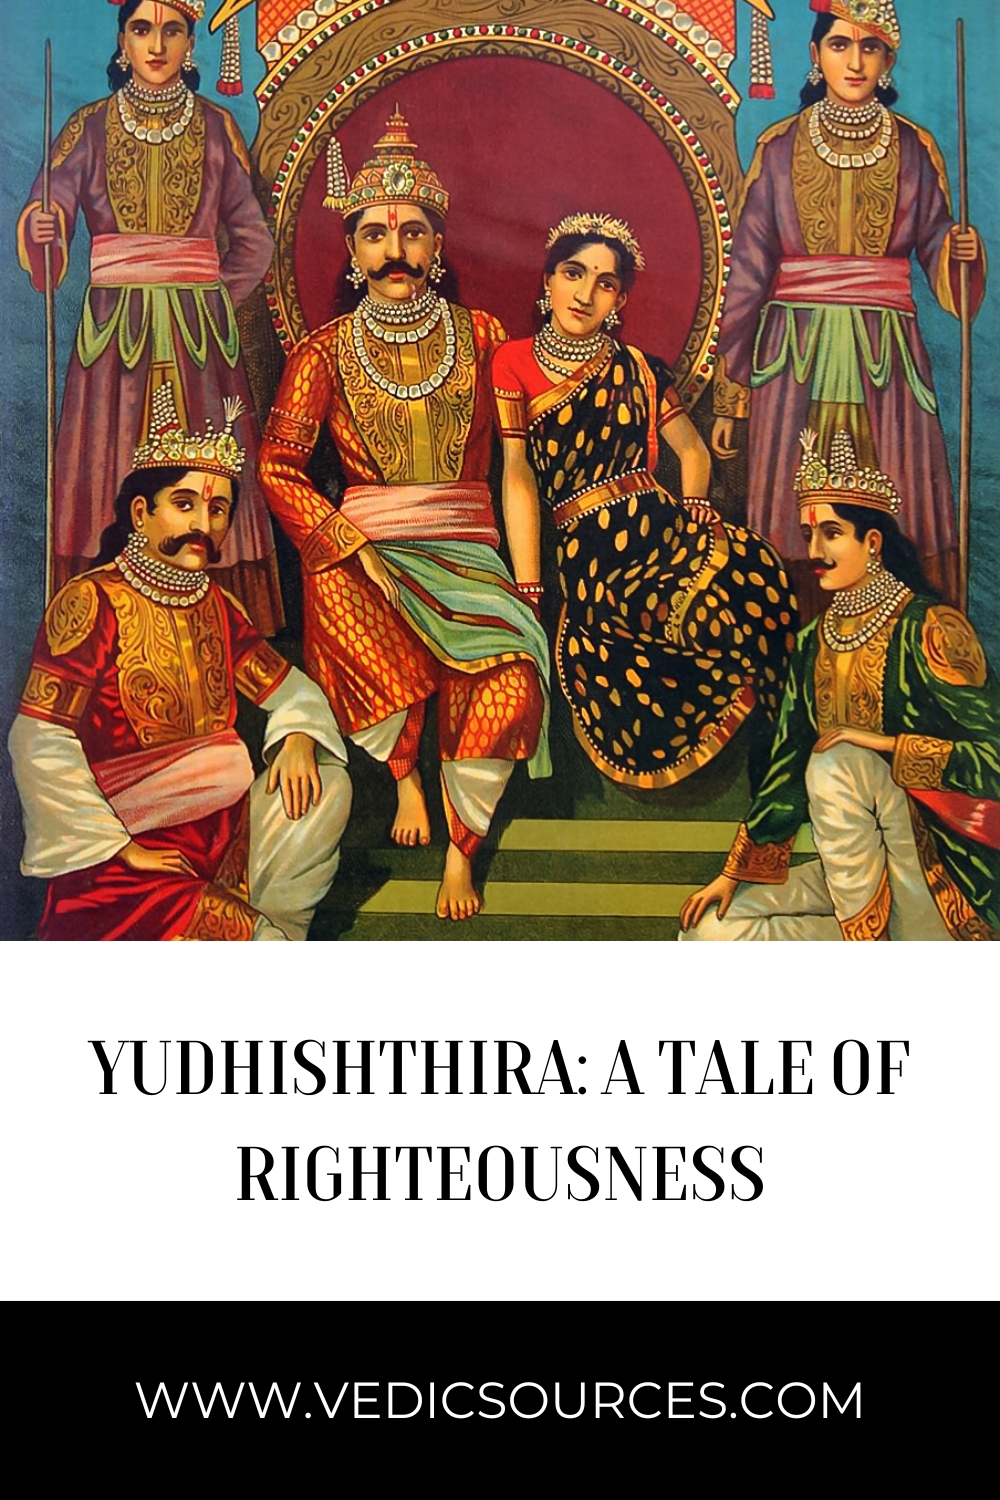 Yudhishthira: A Tale of Righteousness